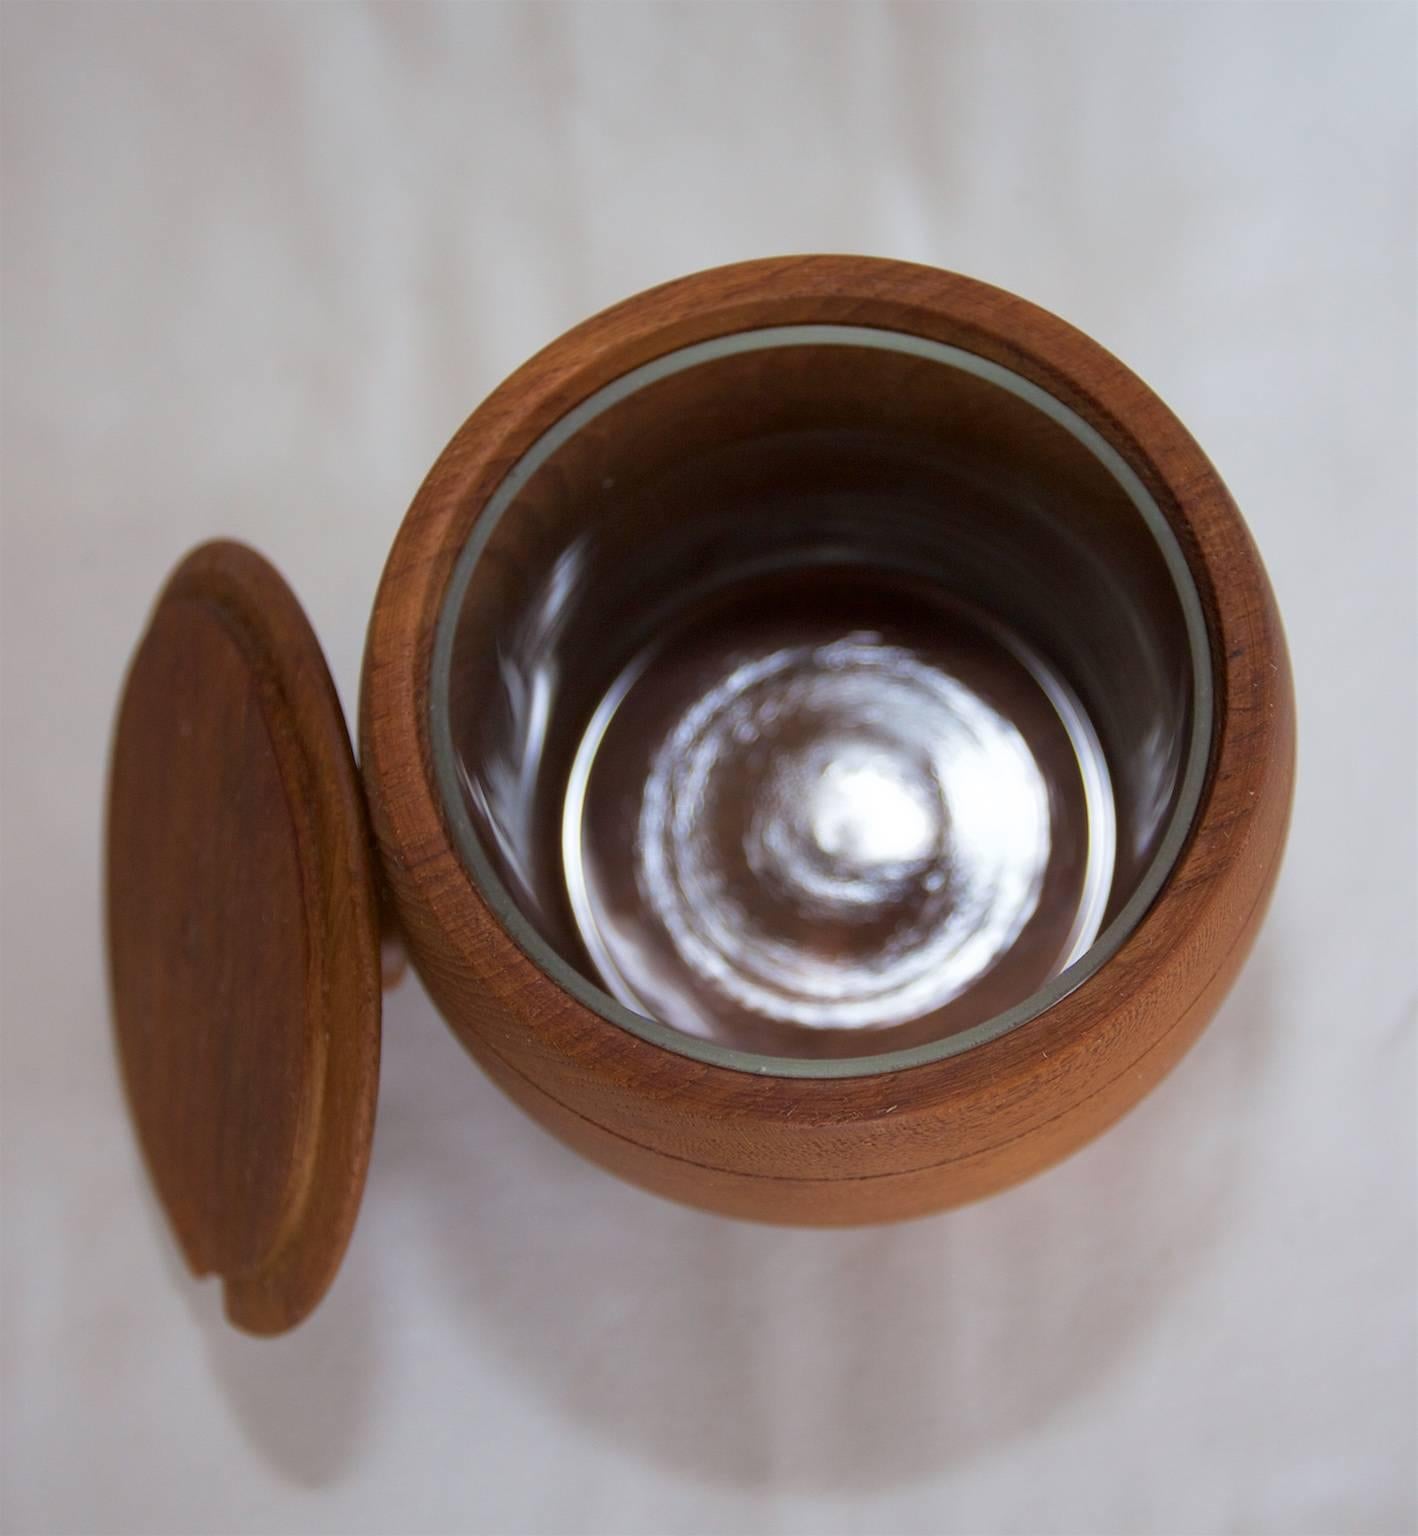 Mid-20th Century Swedish Teak Jar with Lid and Inner Cup by Ståko Stålkompaniet, 1960s-1970s For Sale